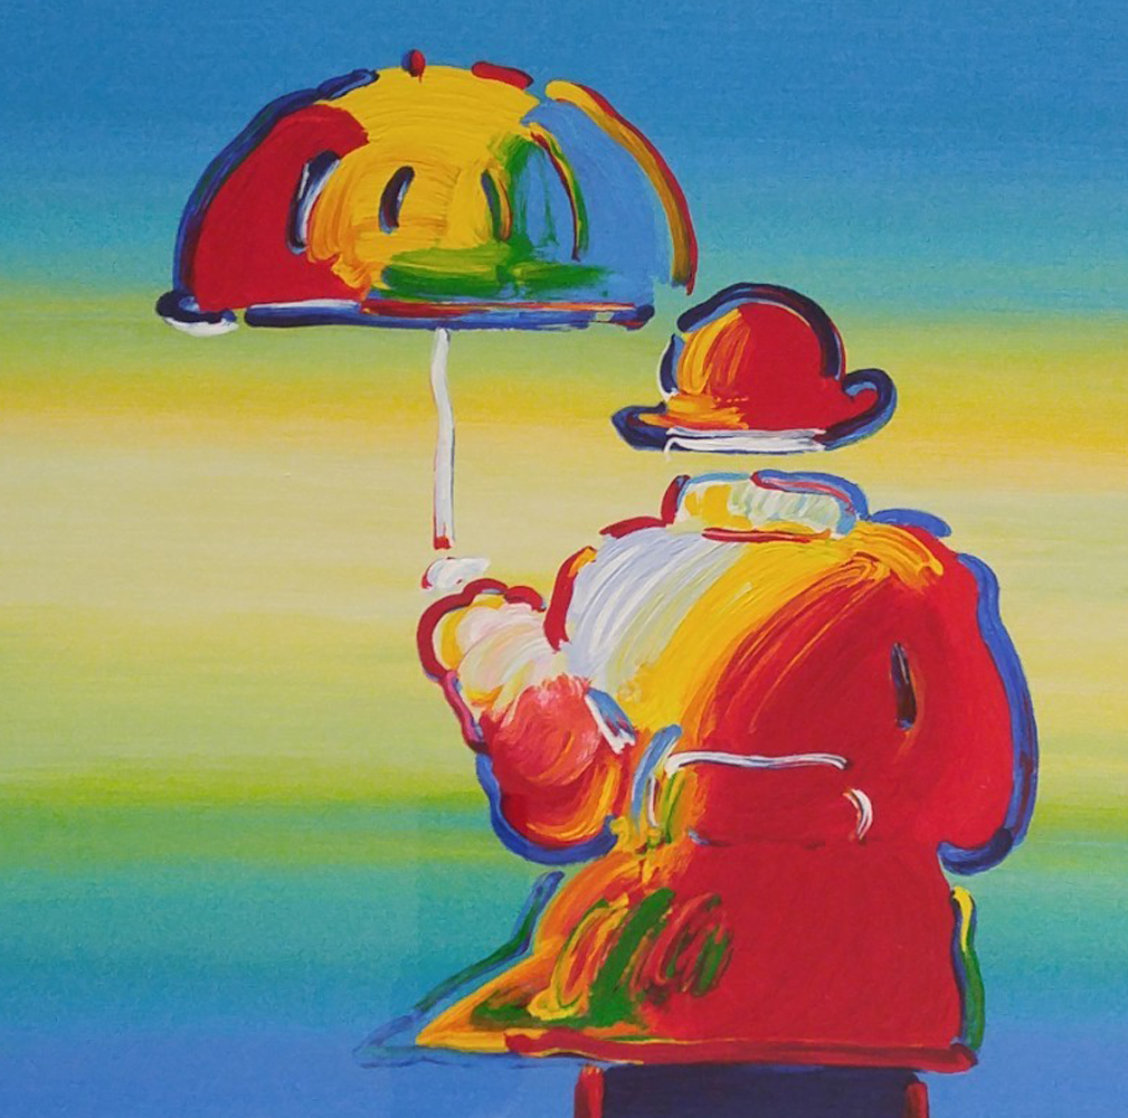 Umbrella Man 2015 Limited Edition Print by Peter Max